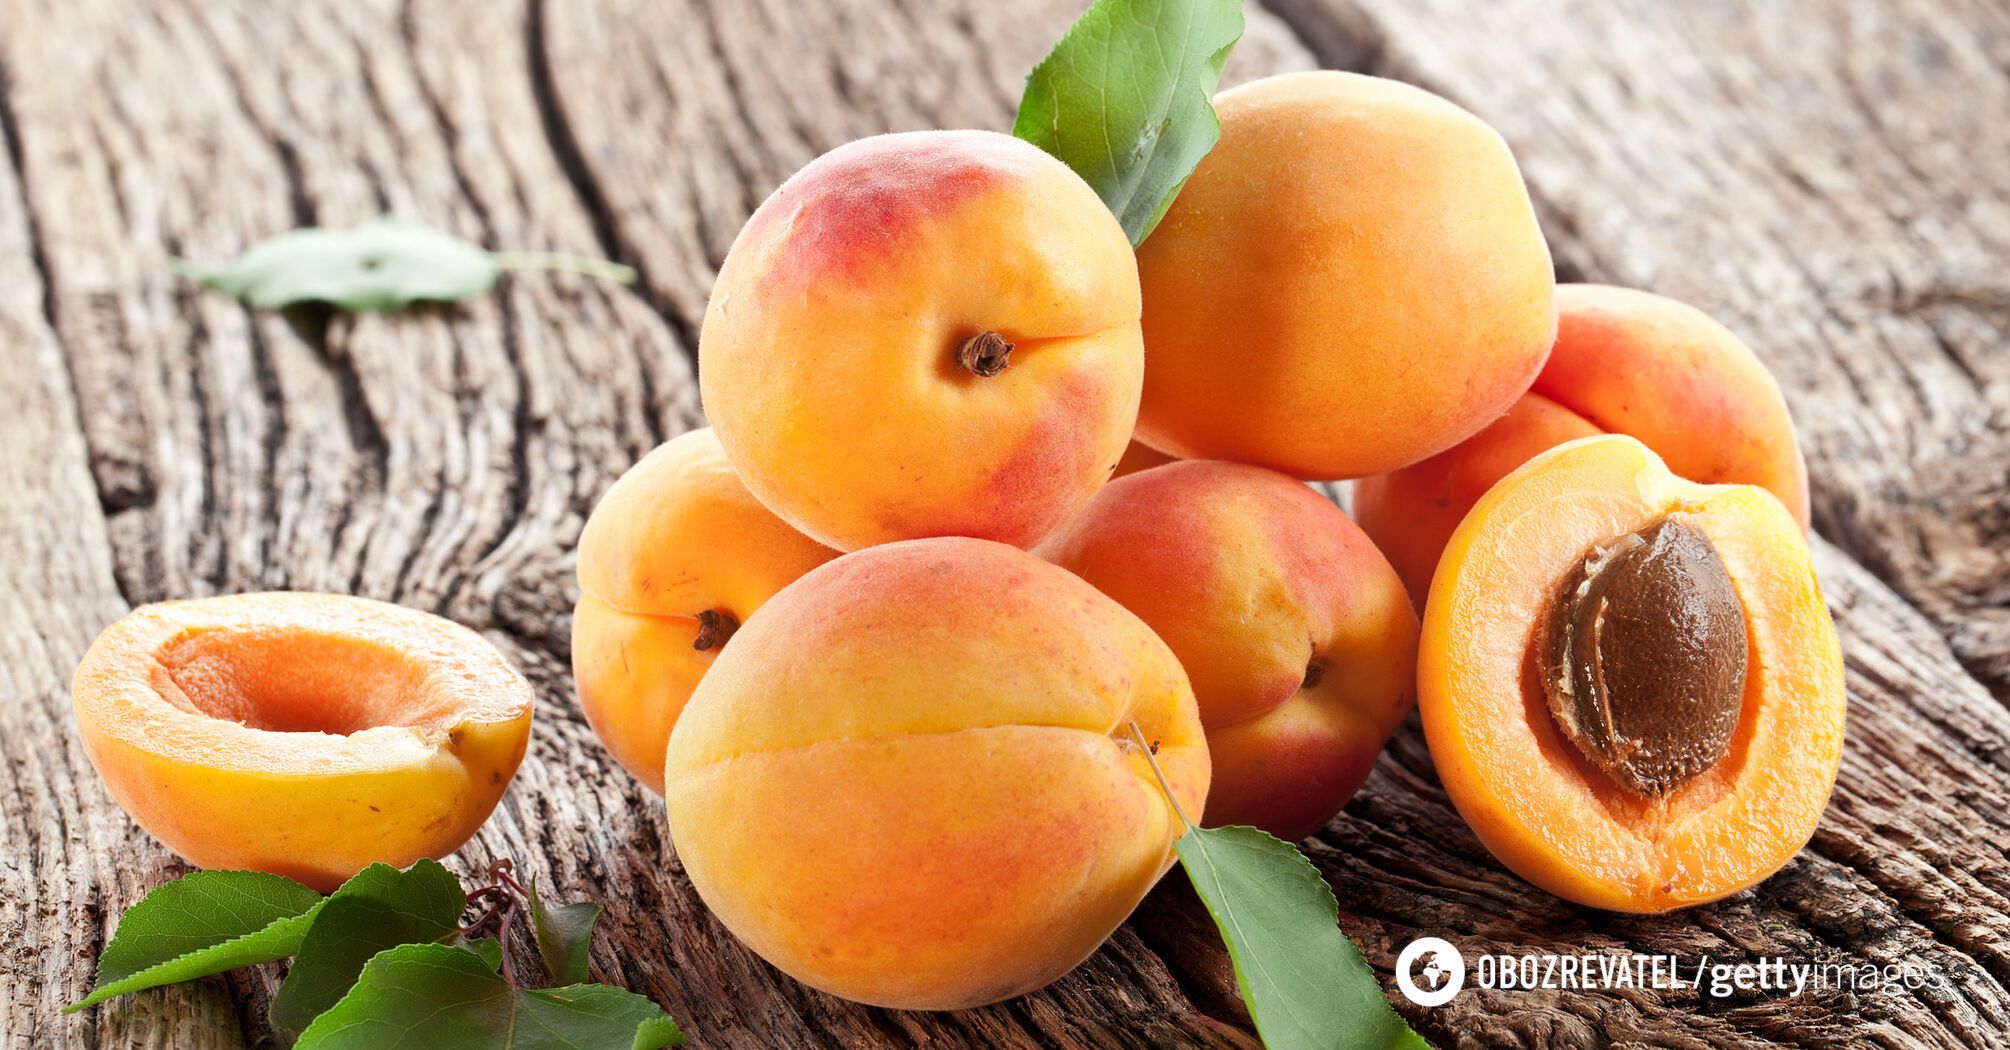 Apricots lower blood pressure thanks to potassium